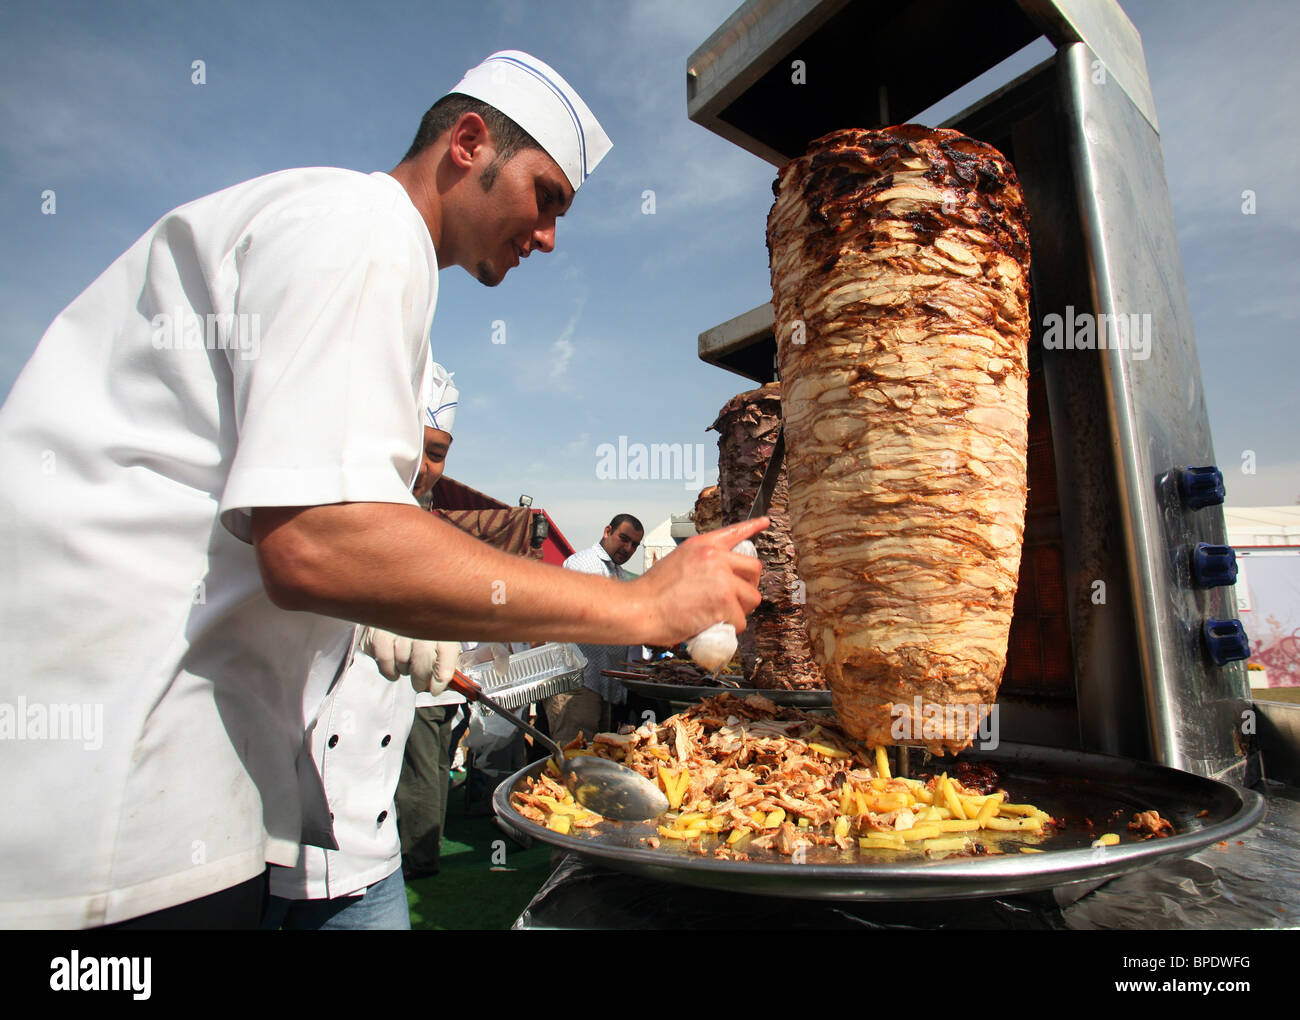 A cook cutting meat off a rotary spit, Dubai, United Arab Emirates Stock Photo